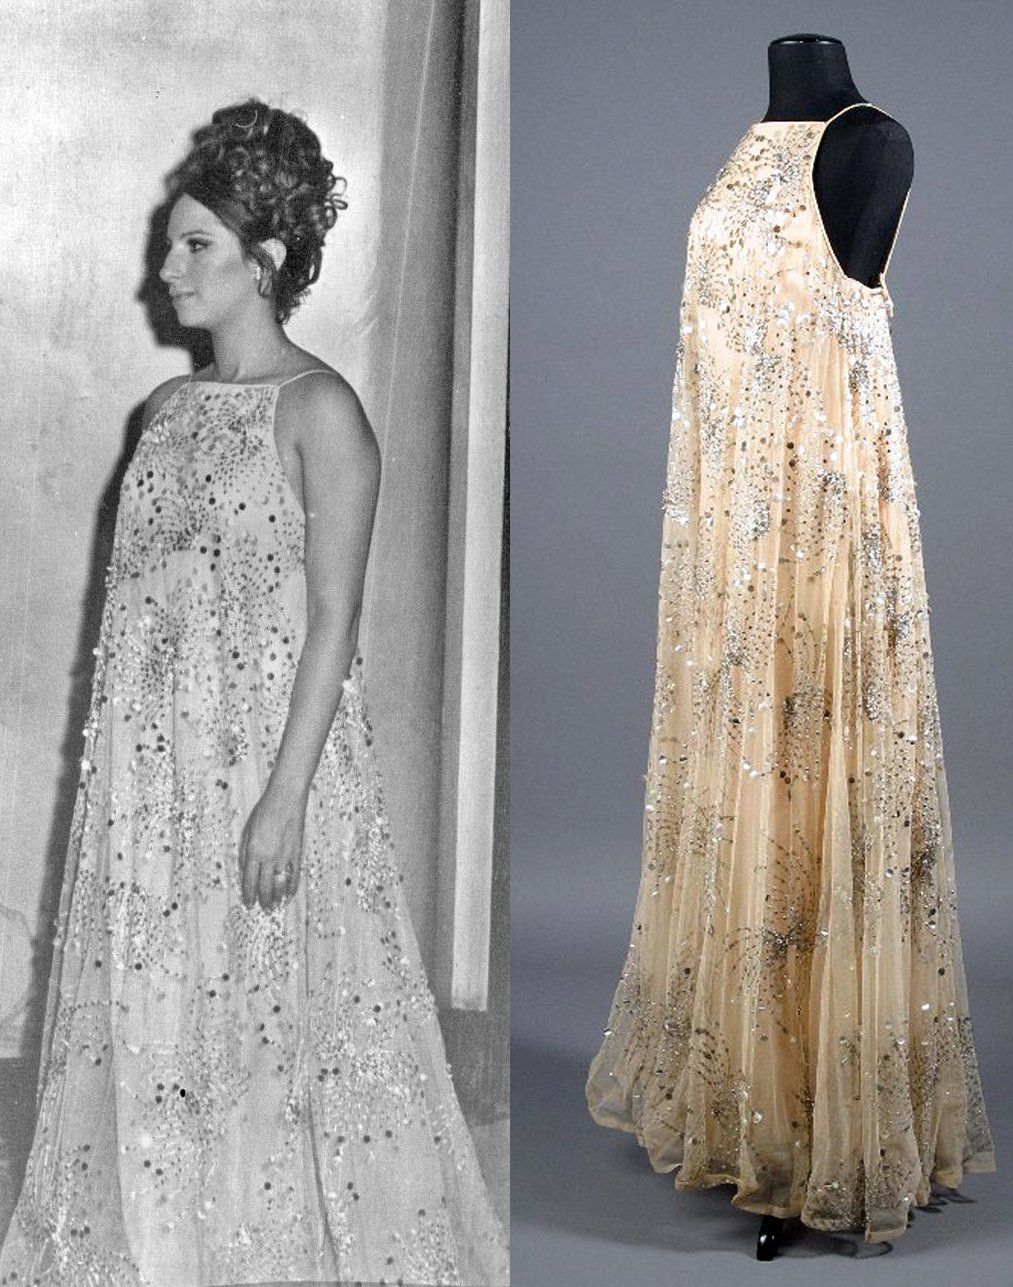 Two photos of Streisand wearing Scaasi gown to Funny Girl New York premiere.